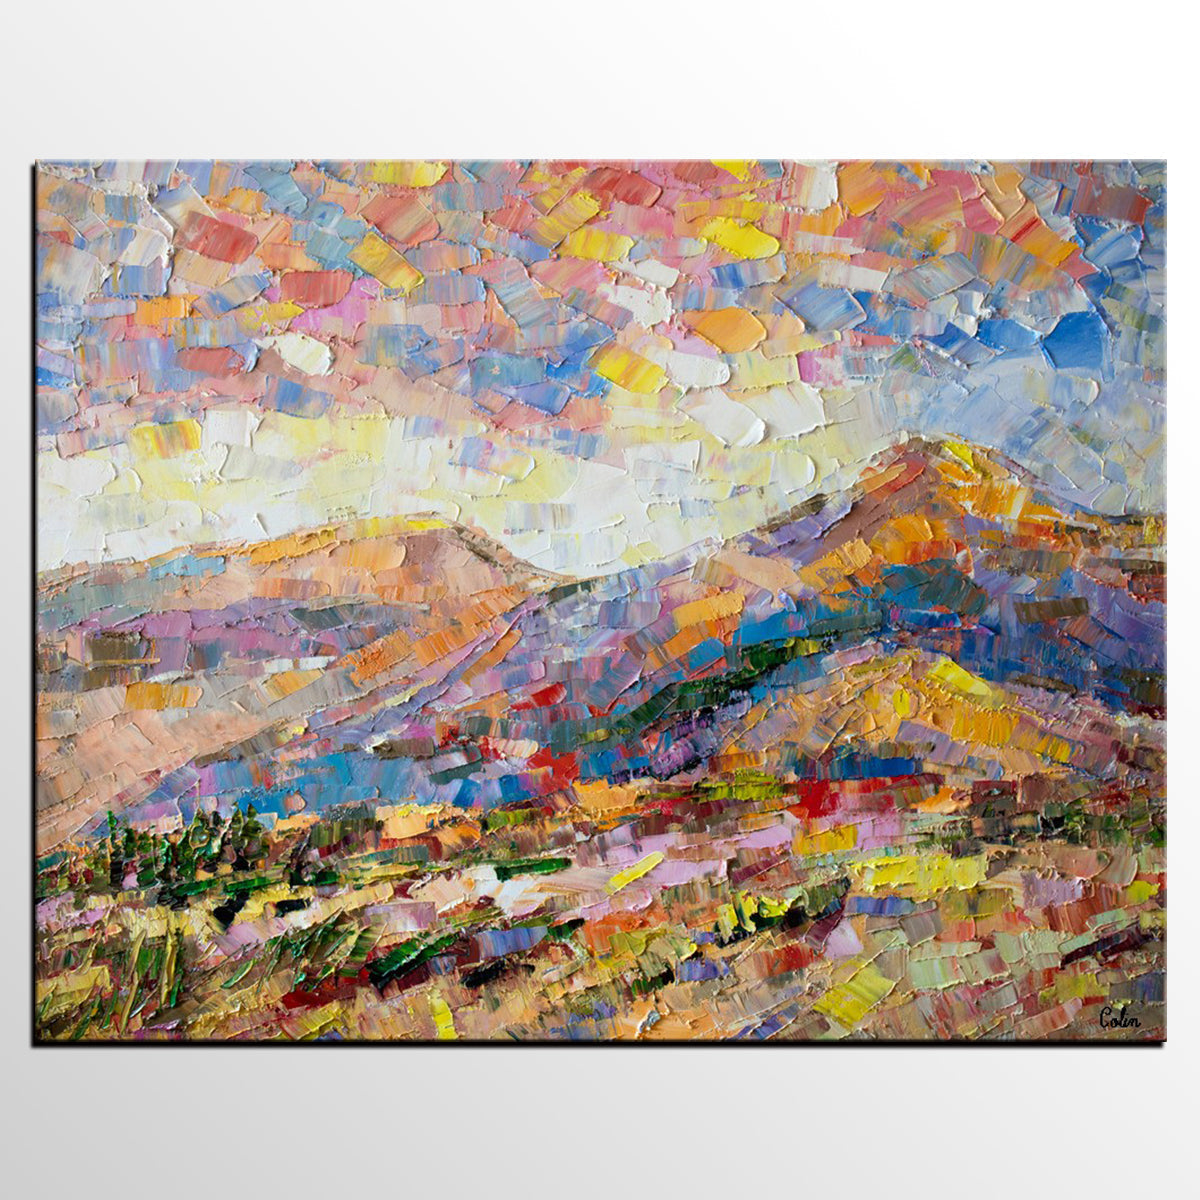 Oil Painting on Canvas, Mountain Landscape Painting, Custom Original Painting for Sale, Landscape Canvas Painting for Bedroom-Art Painting Canvas